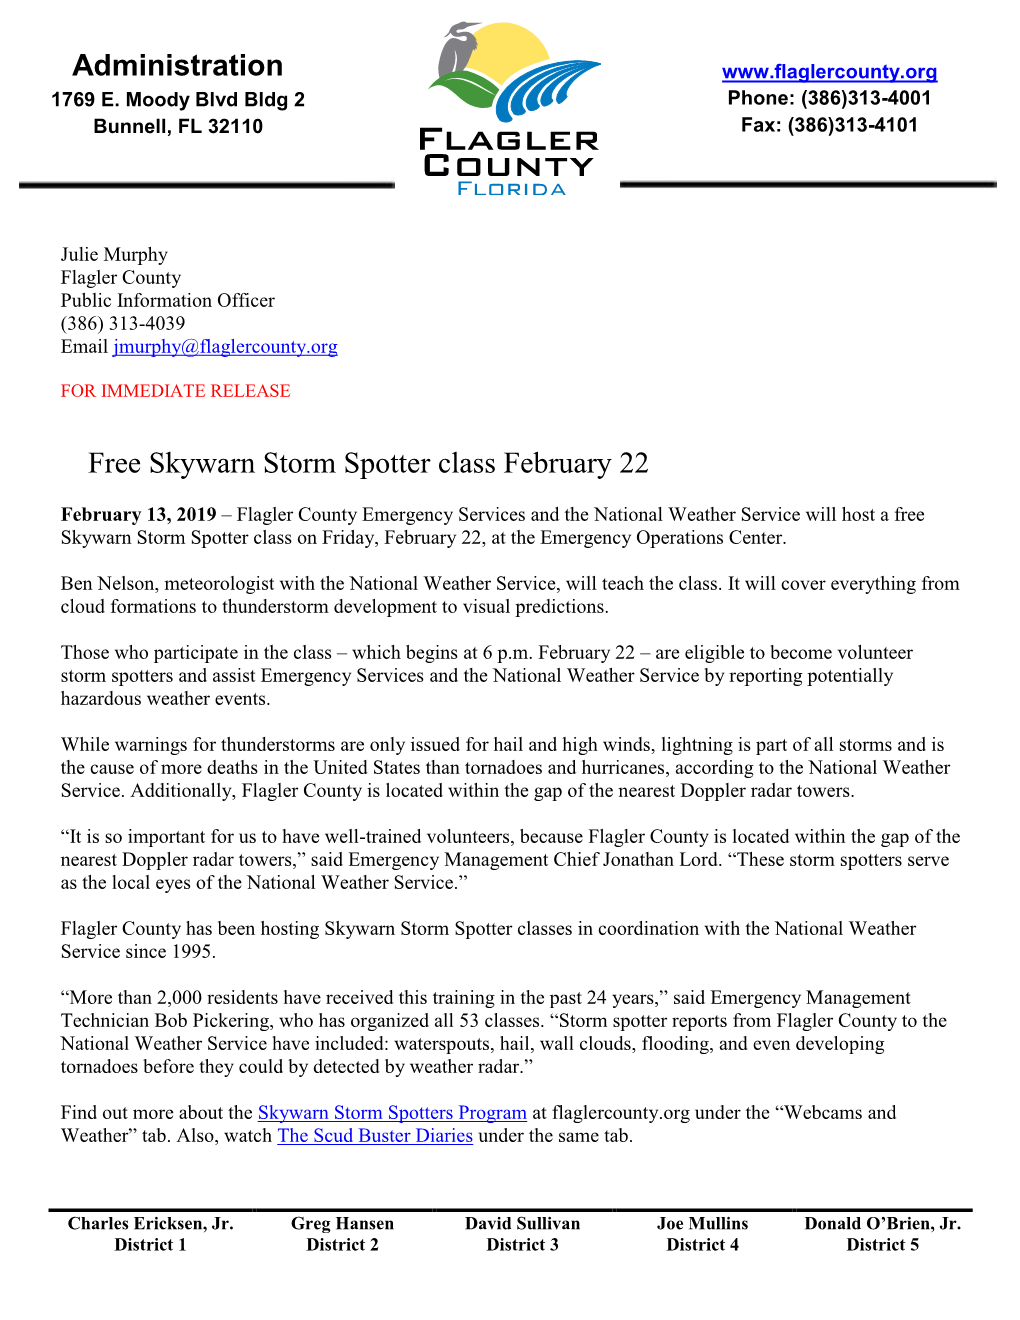 Administration Free Skywarn Storm Spotter Class February 22